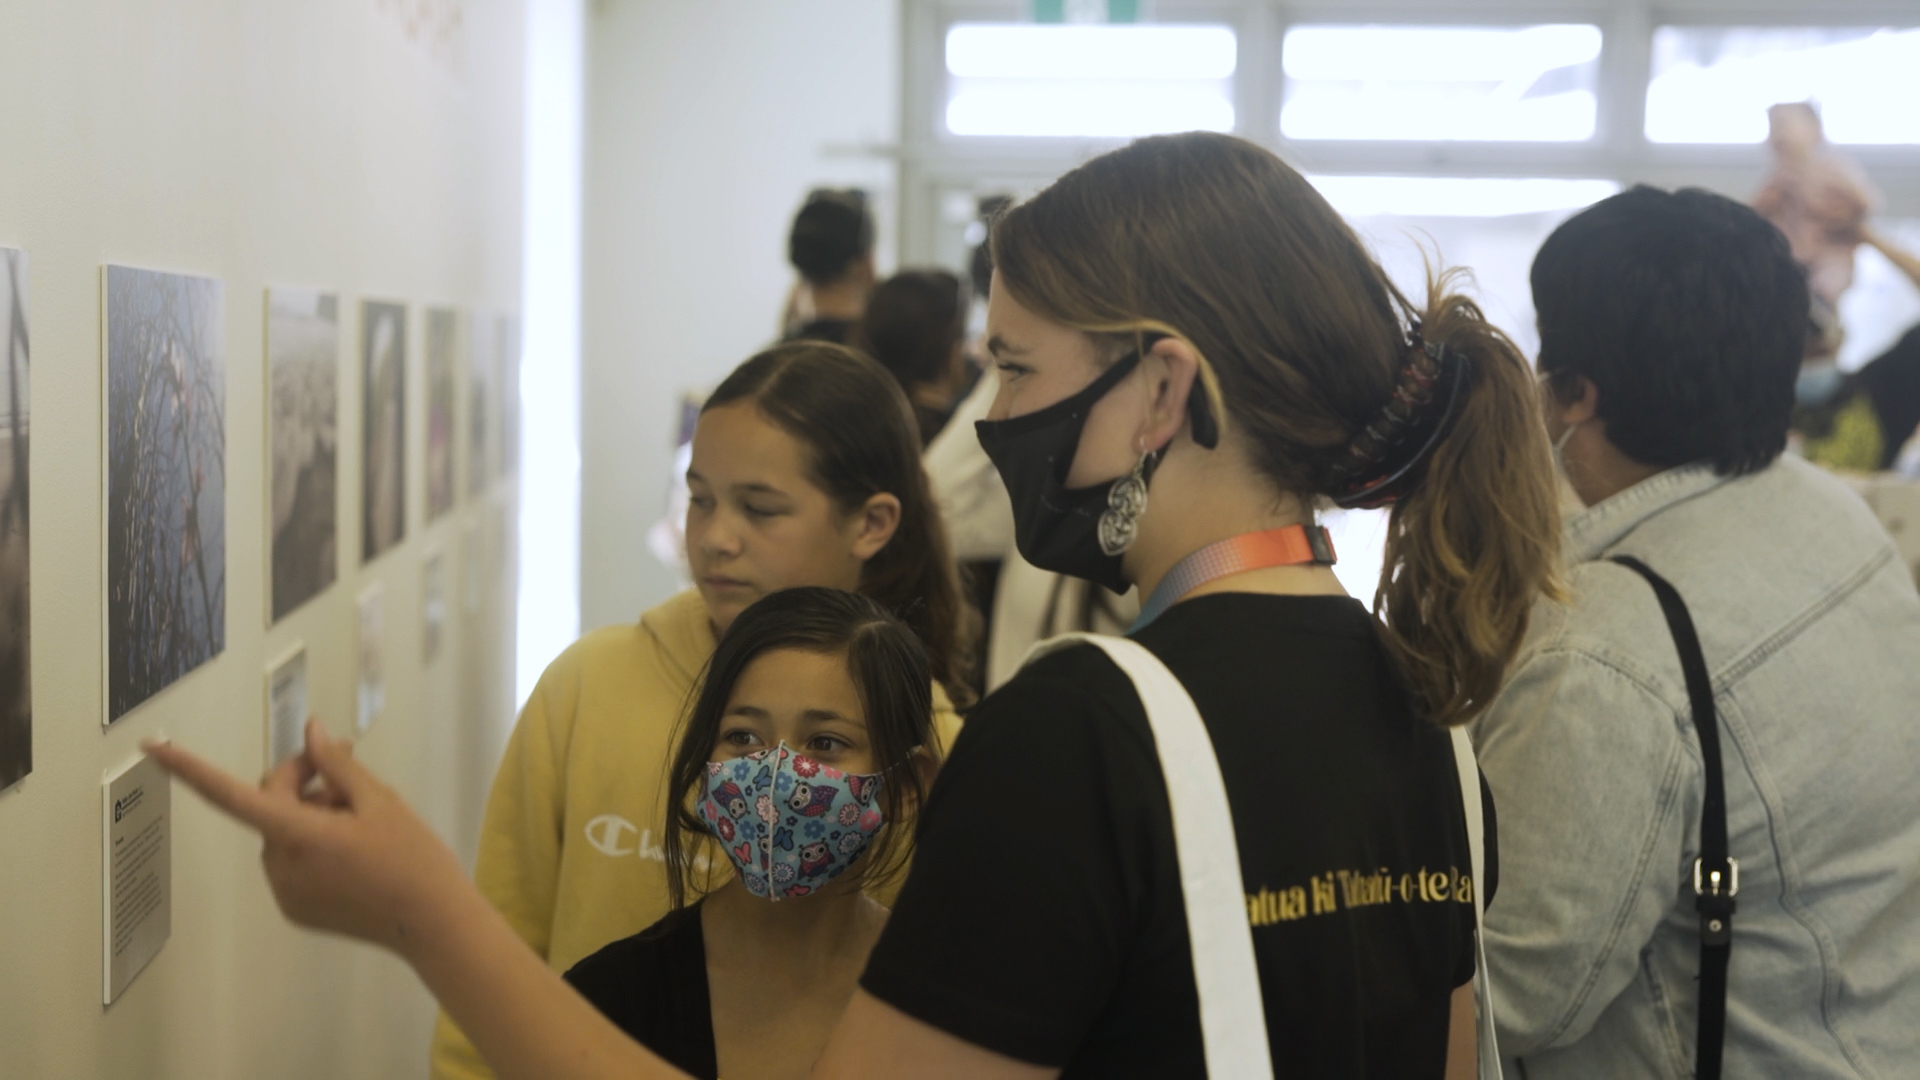 Māori youth are capturing climate change through photos